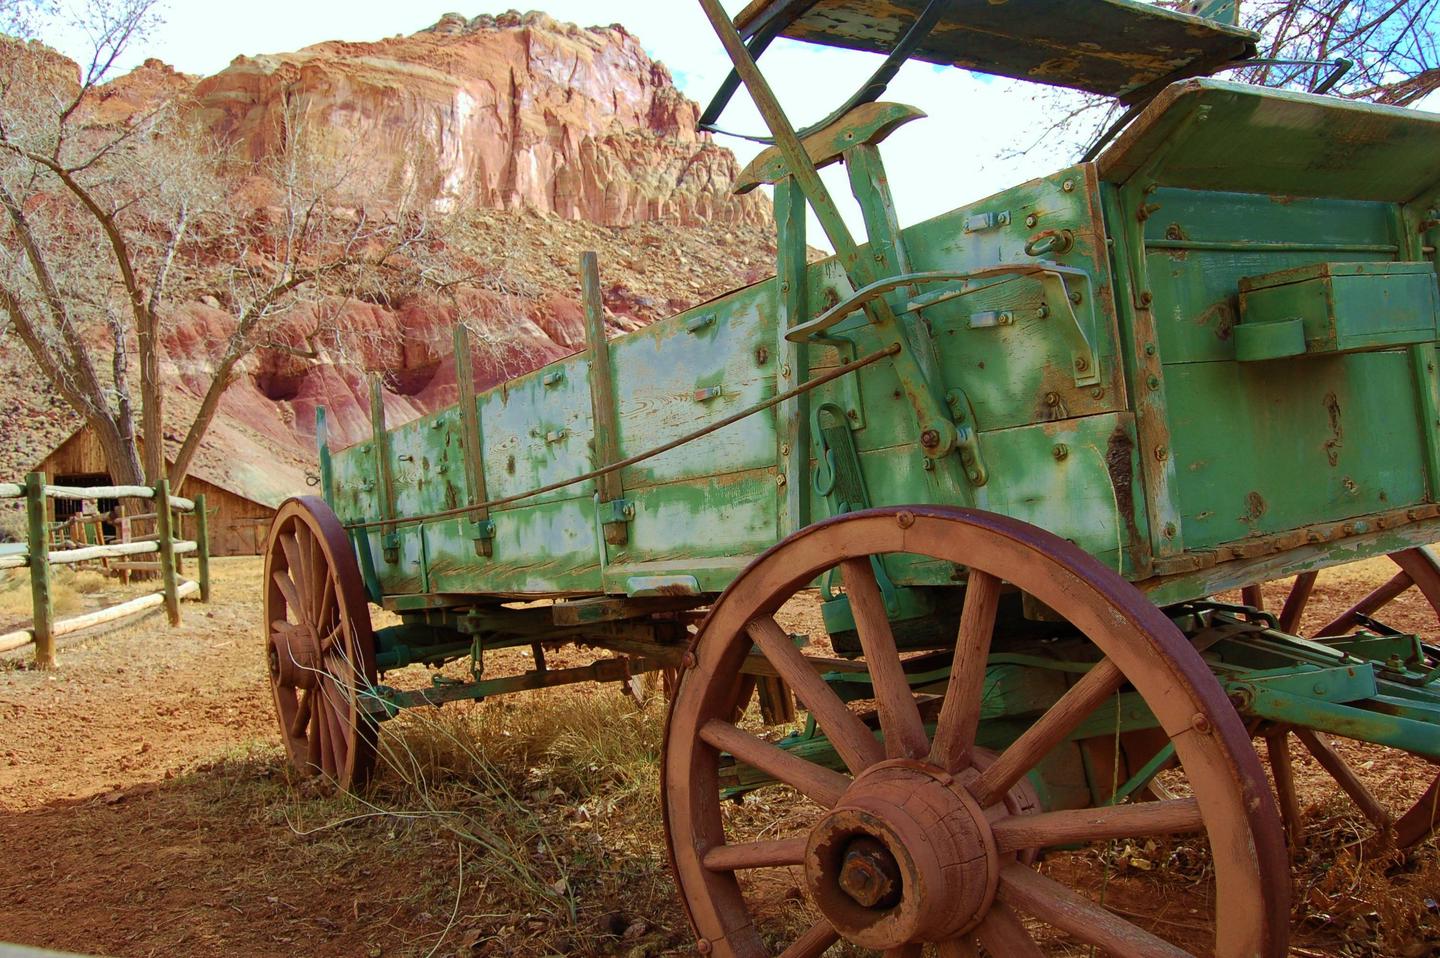 A green wagon with rusty wheels is the center of the image. A red rock cliff is behind it.Old wagon near Fruita Campground